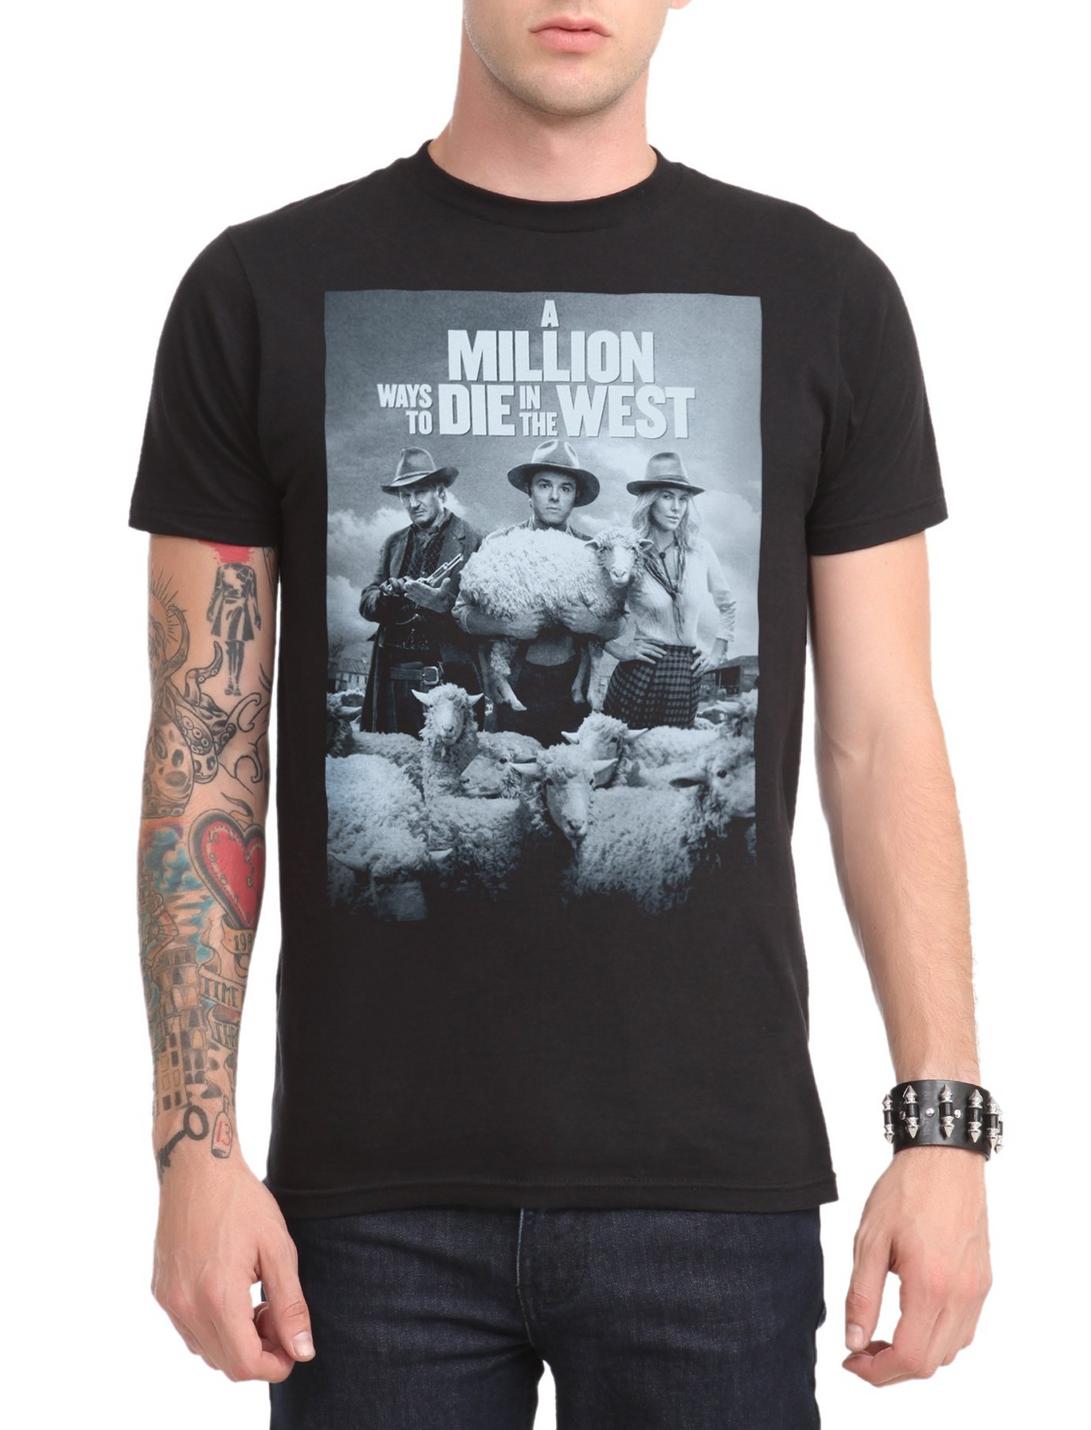 A Million Ways To Die In The West Poster T-Shirt, BLACK, hi-res